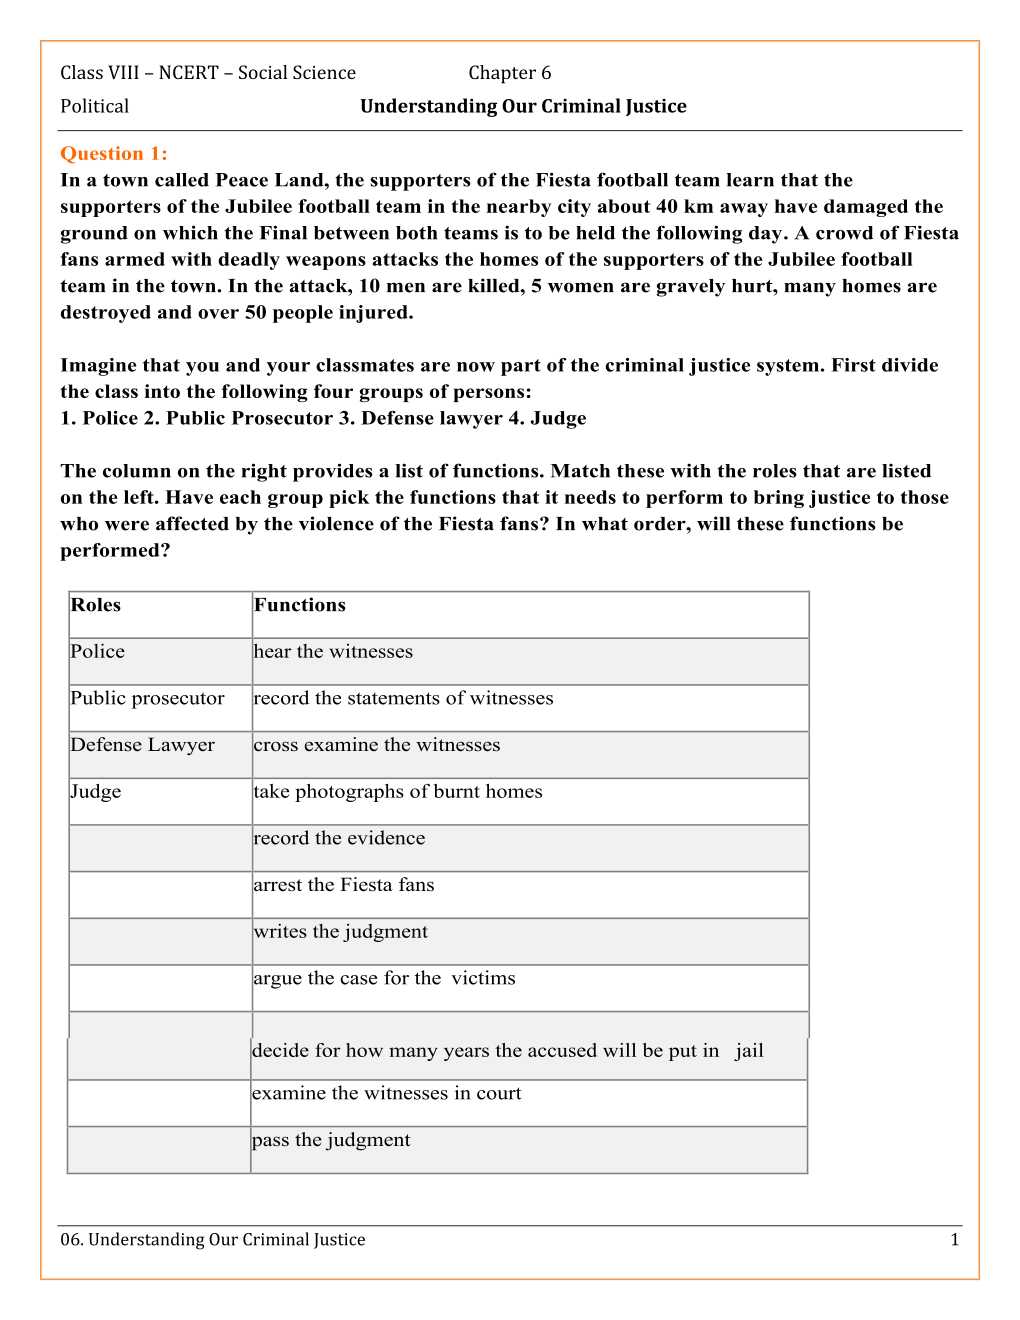 NCERT Solutions For Class 8 Social Science Social and Political Life Chapter 6